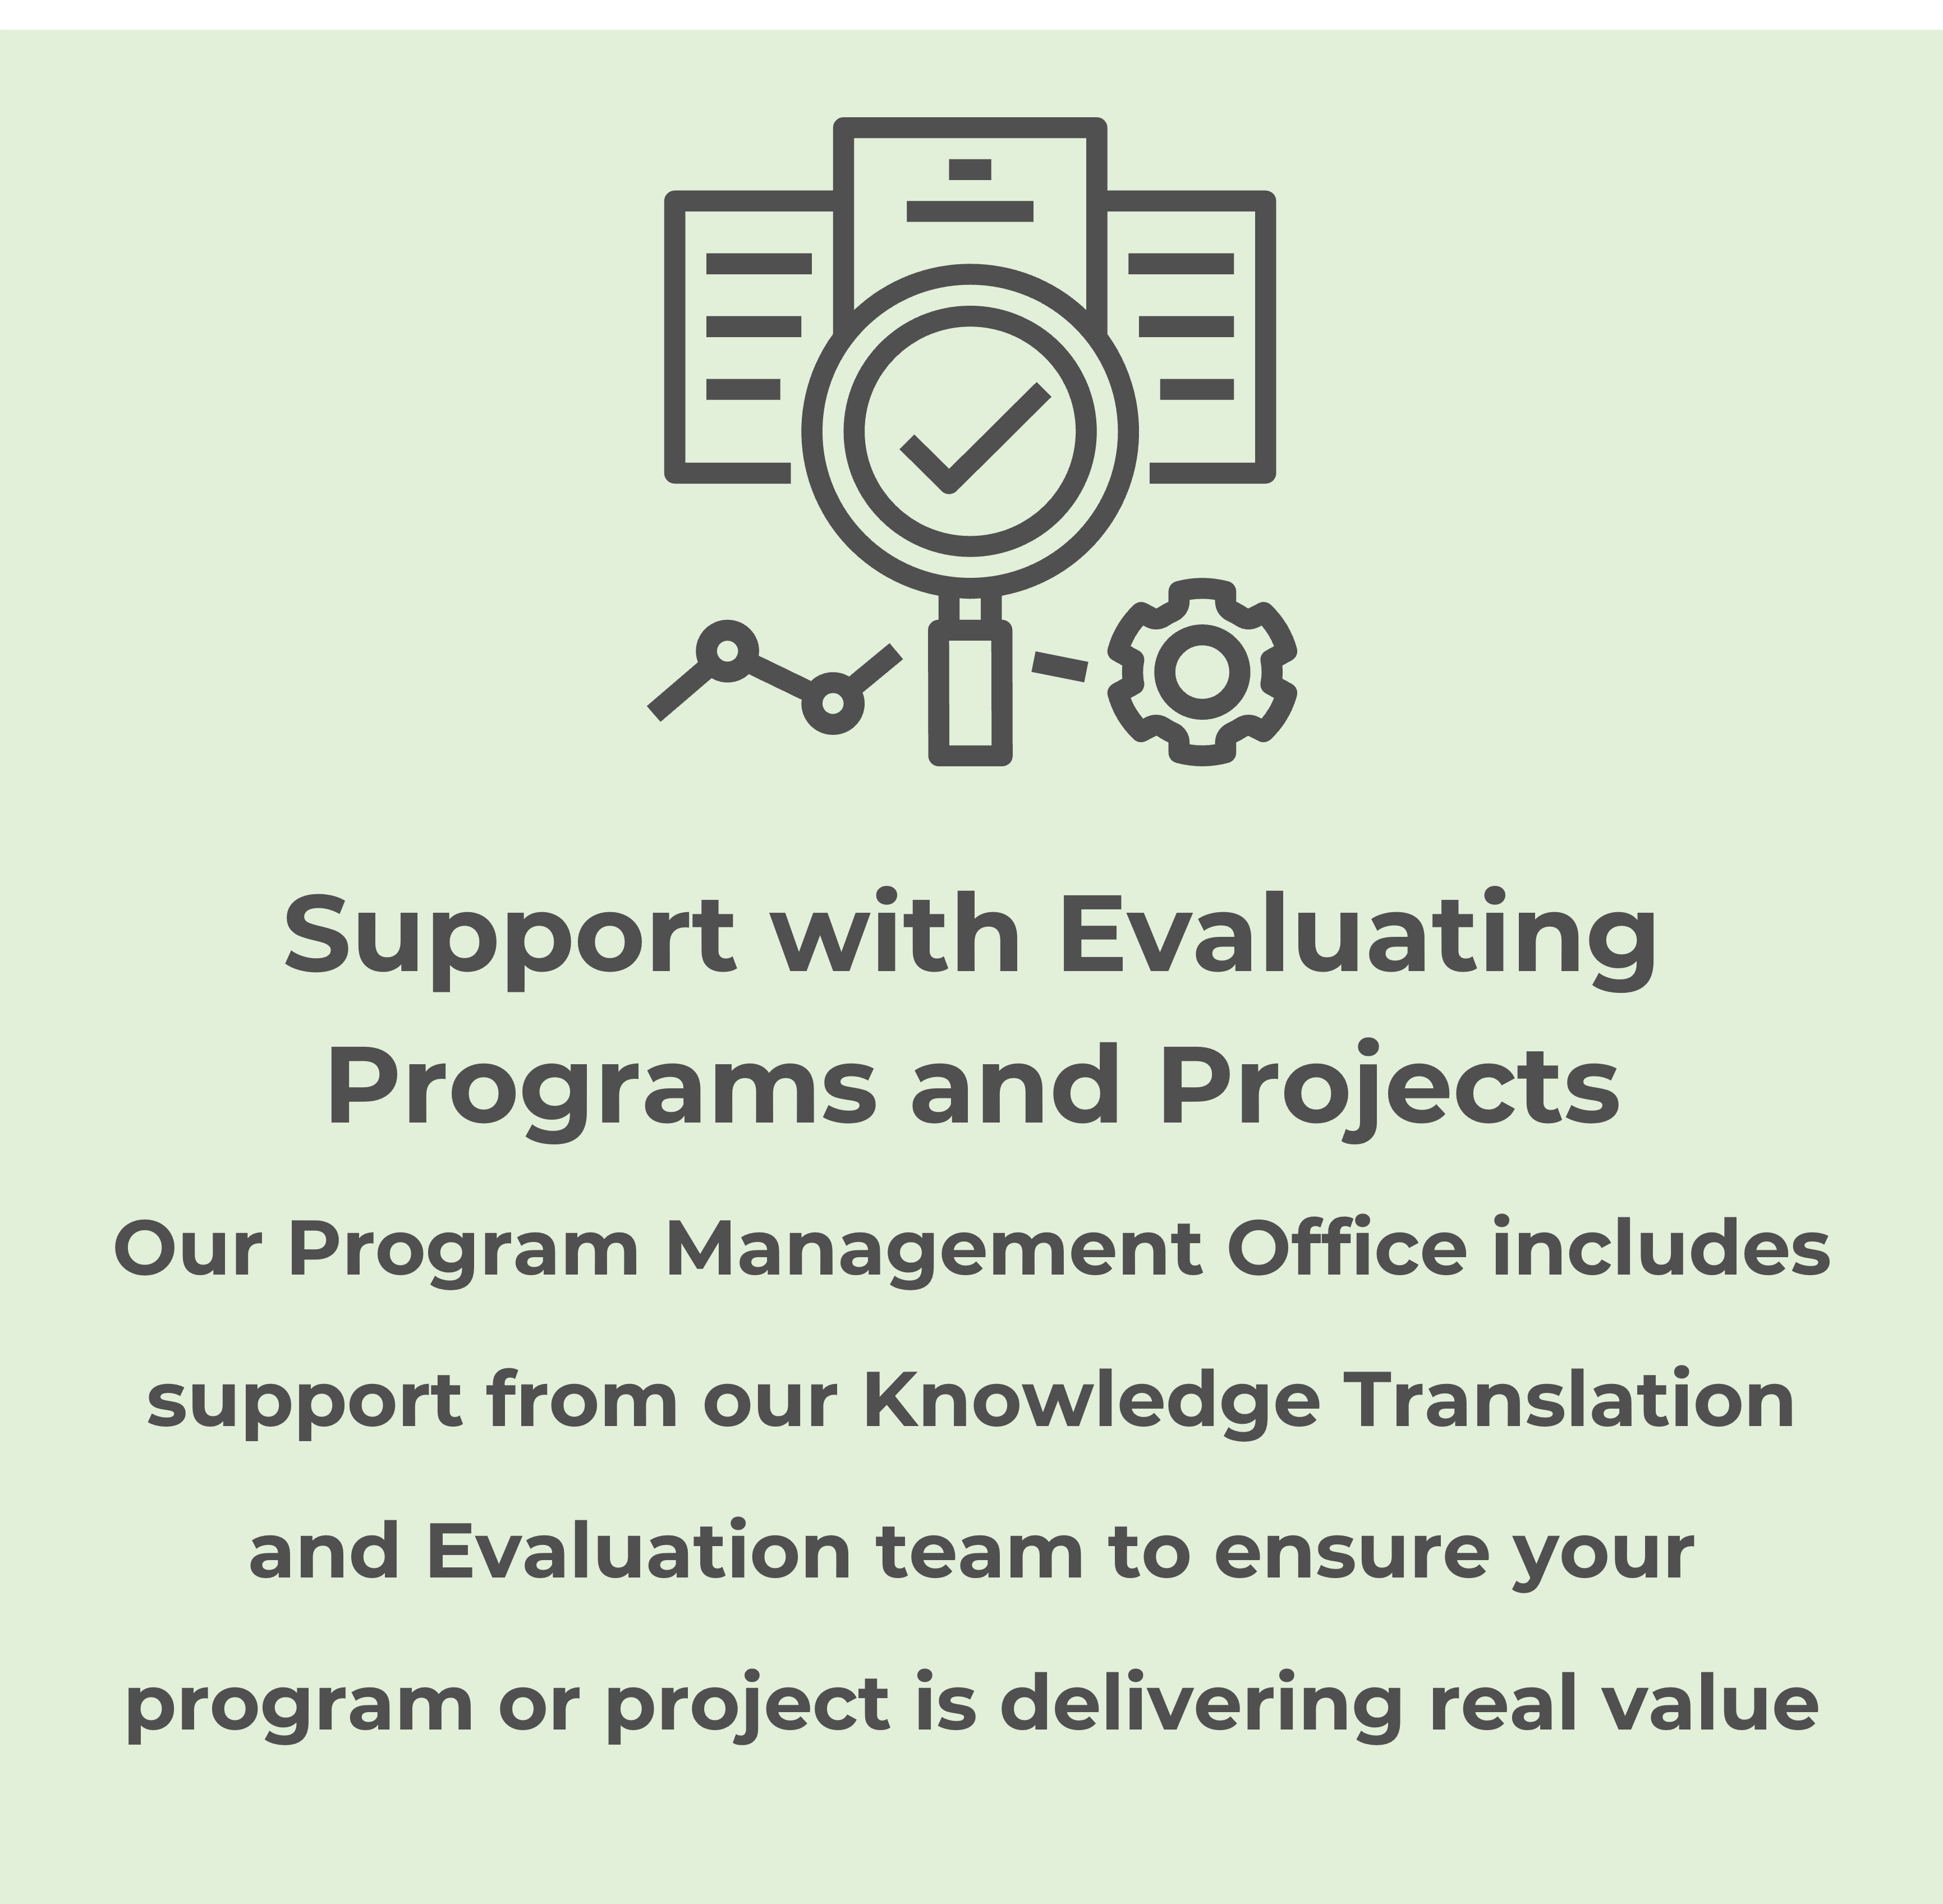 Support with Evaluating Programs and Projects: Our Program Management Office includes support from our Knowledge Translation and Evaluation team to ensure your program or project is delivering real value